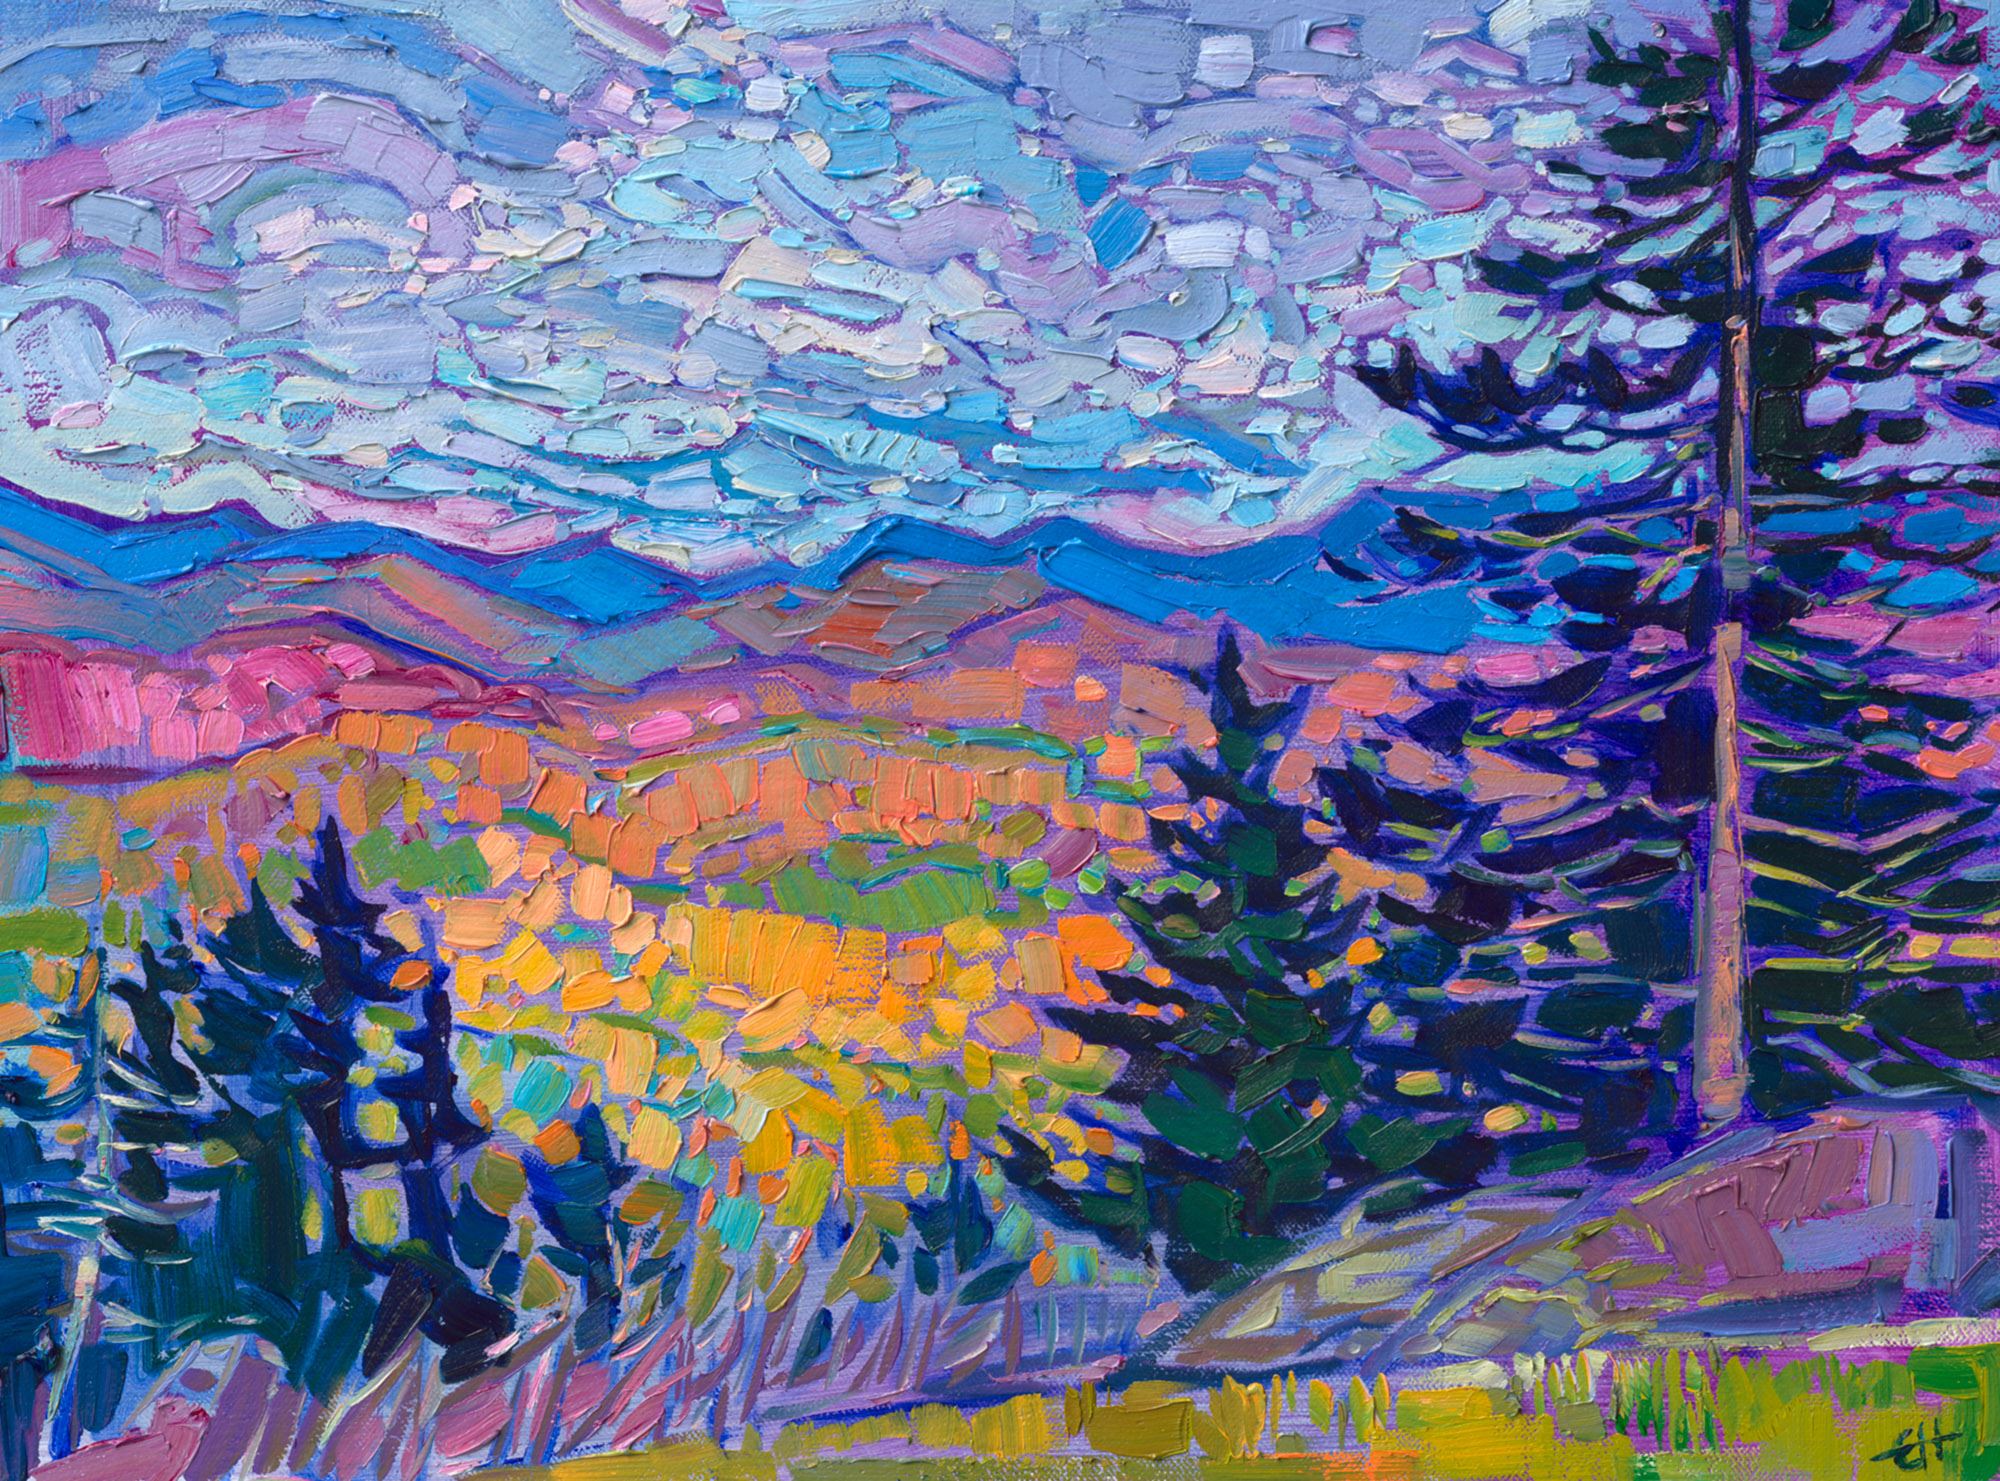 Painting the Blue Ridge Mountains